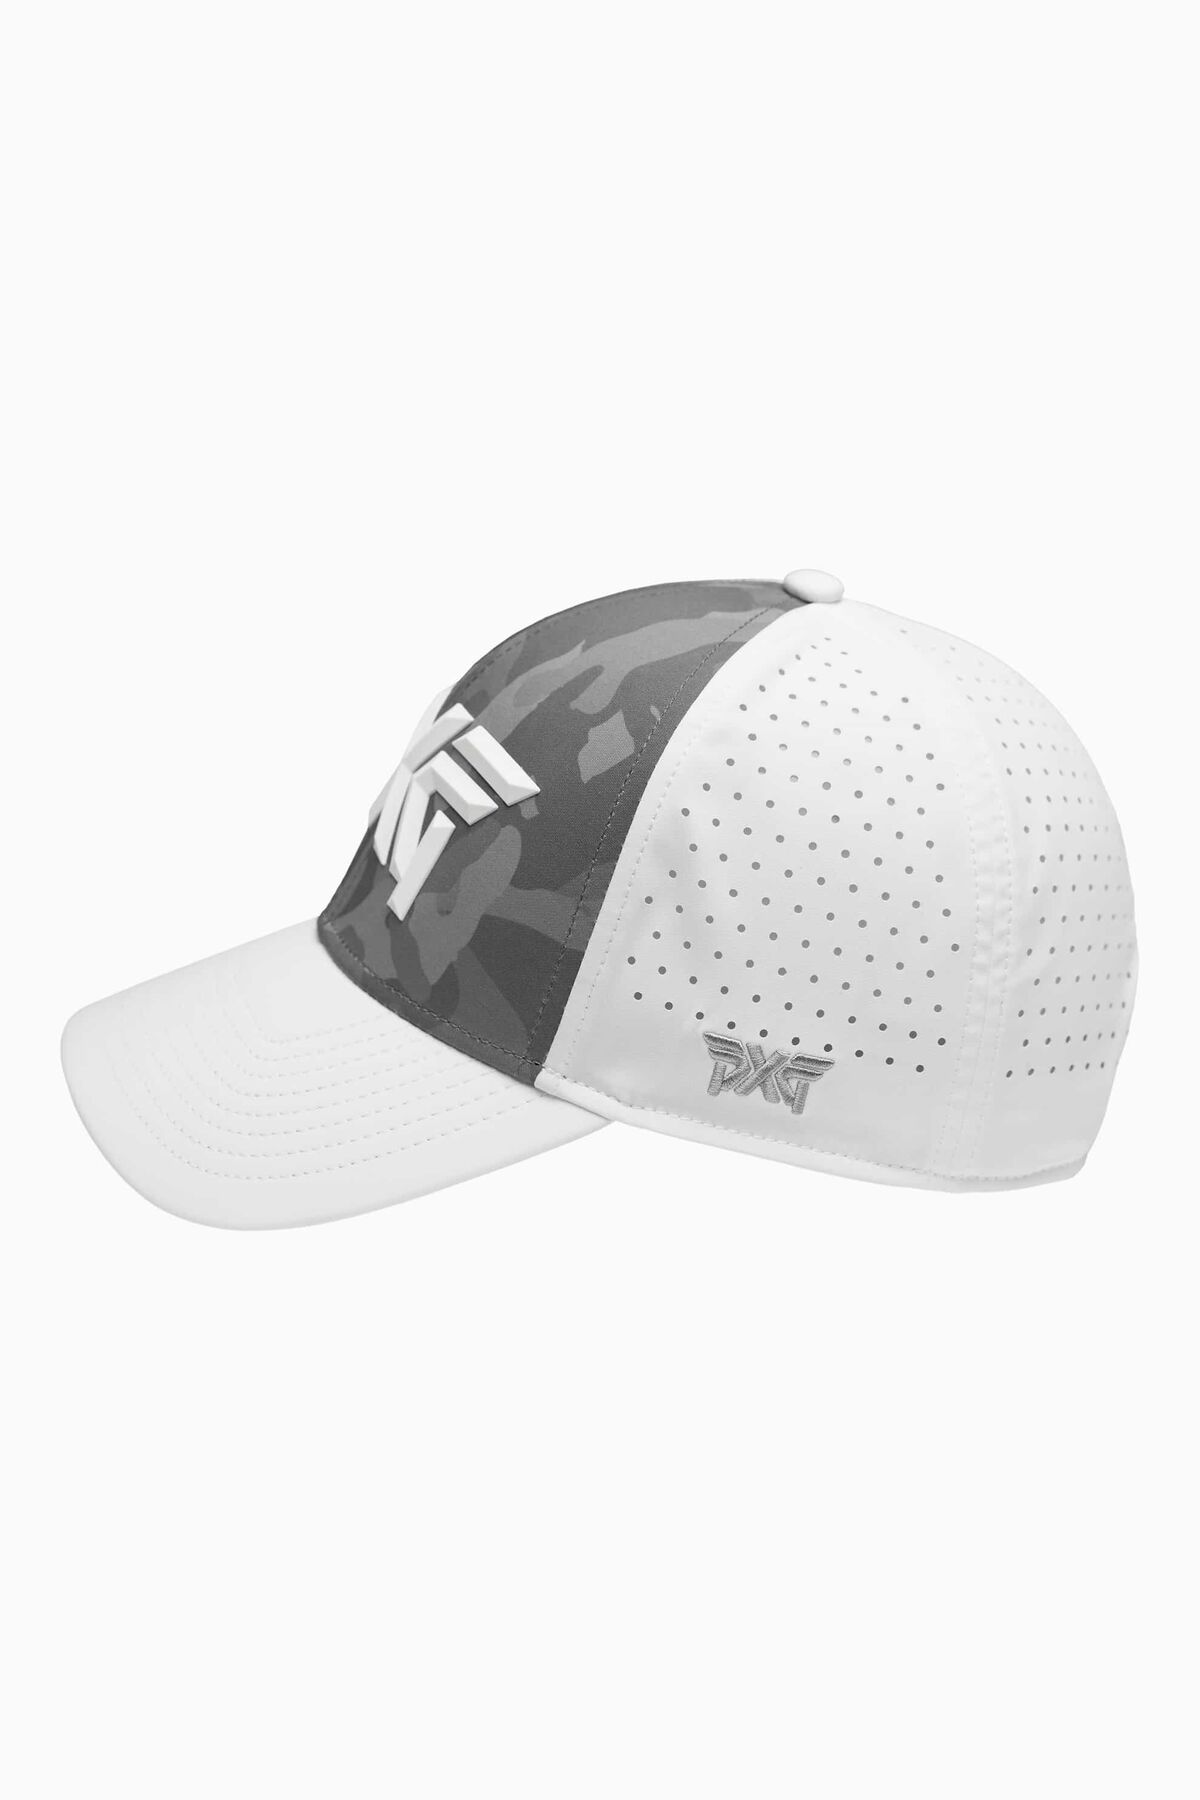 Fairway Camo Faceted Large 6 Panel Structured Cap White & Grey